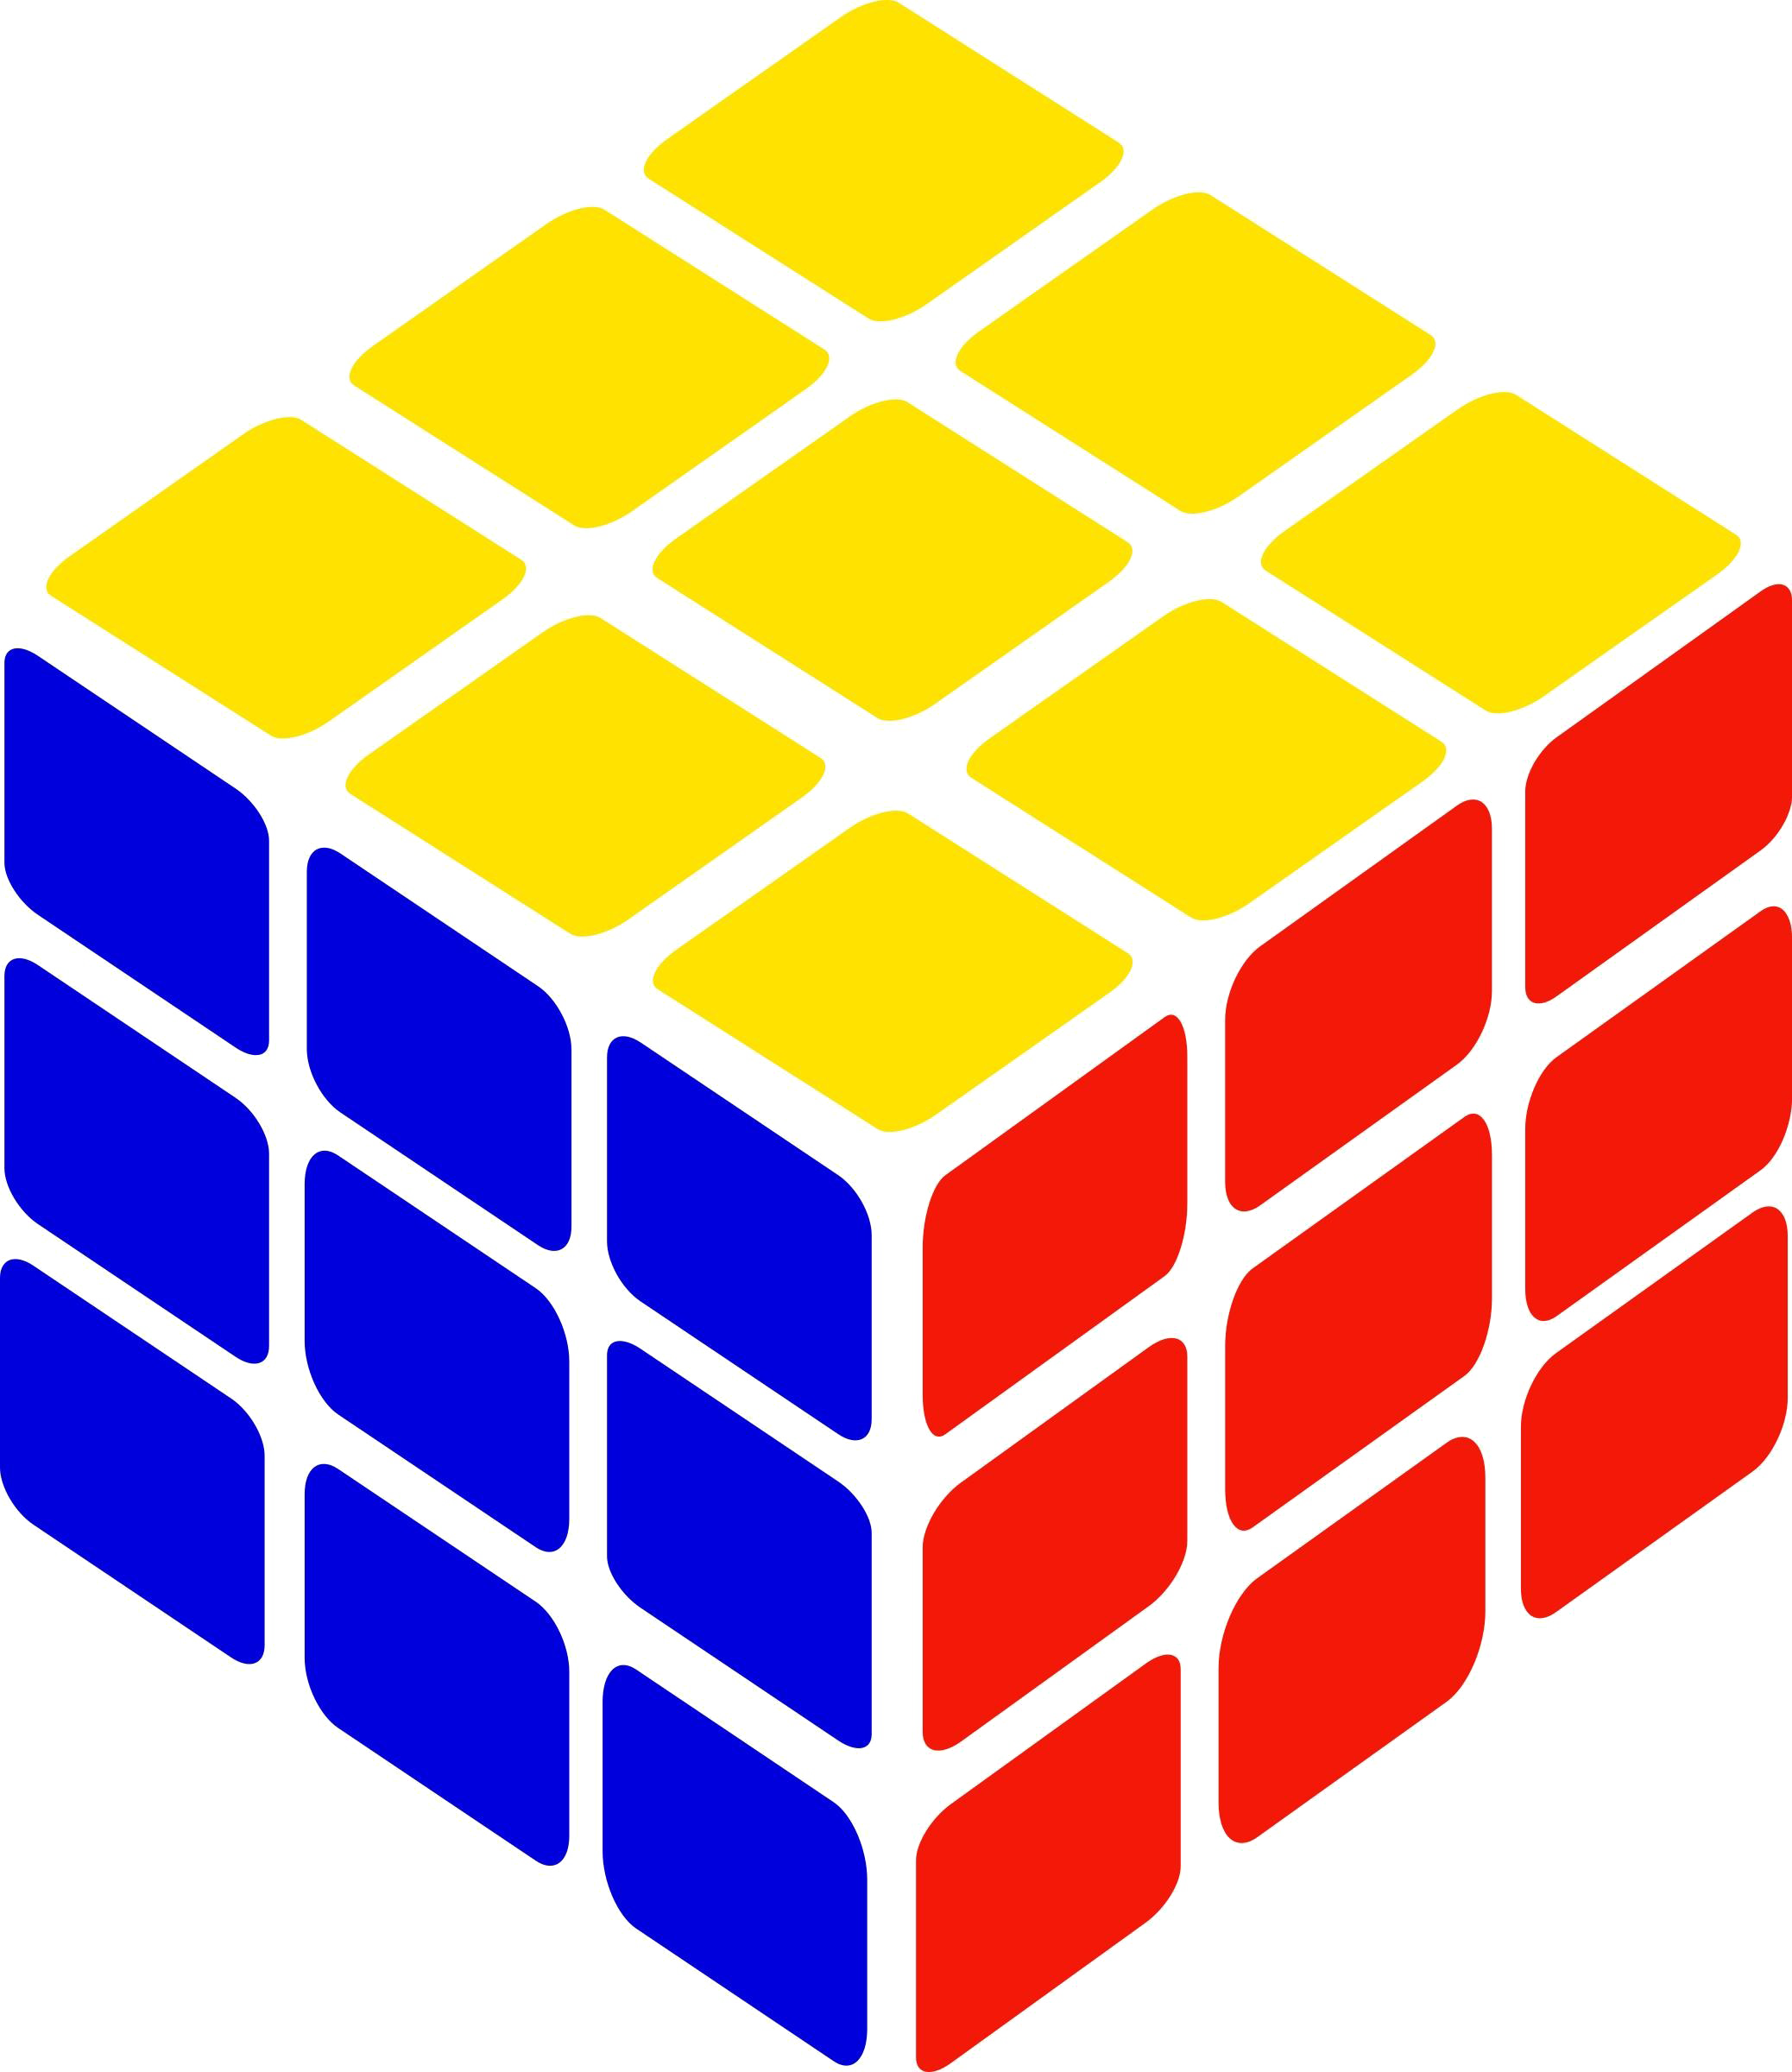 Rubik’s Cube PNG Background Image